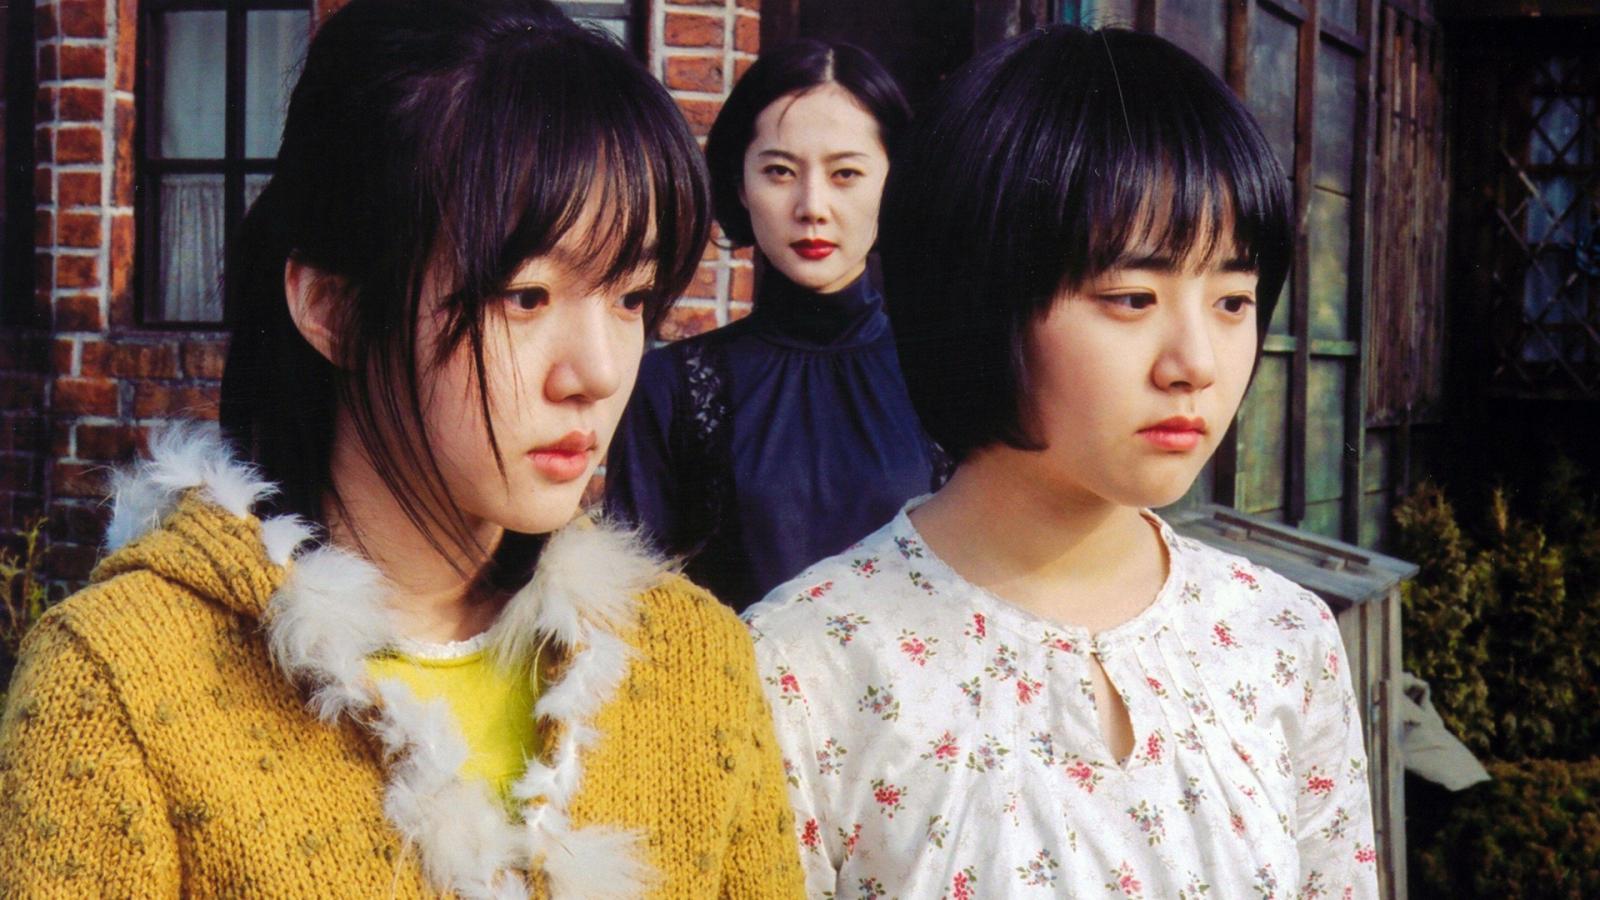 10 South Korean Horror Movies That Will Keep You Up at Night - image 3